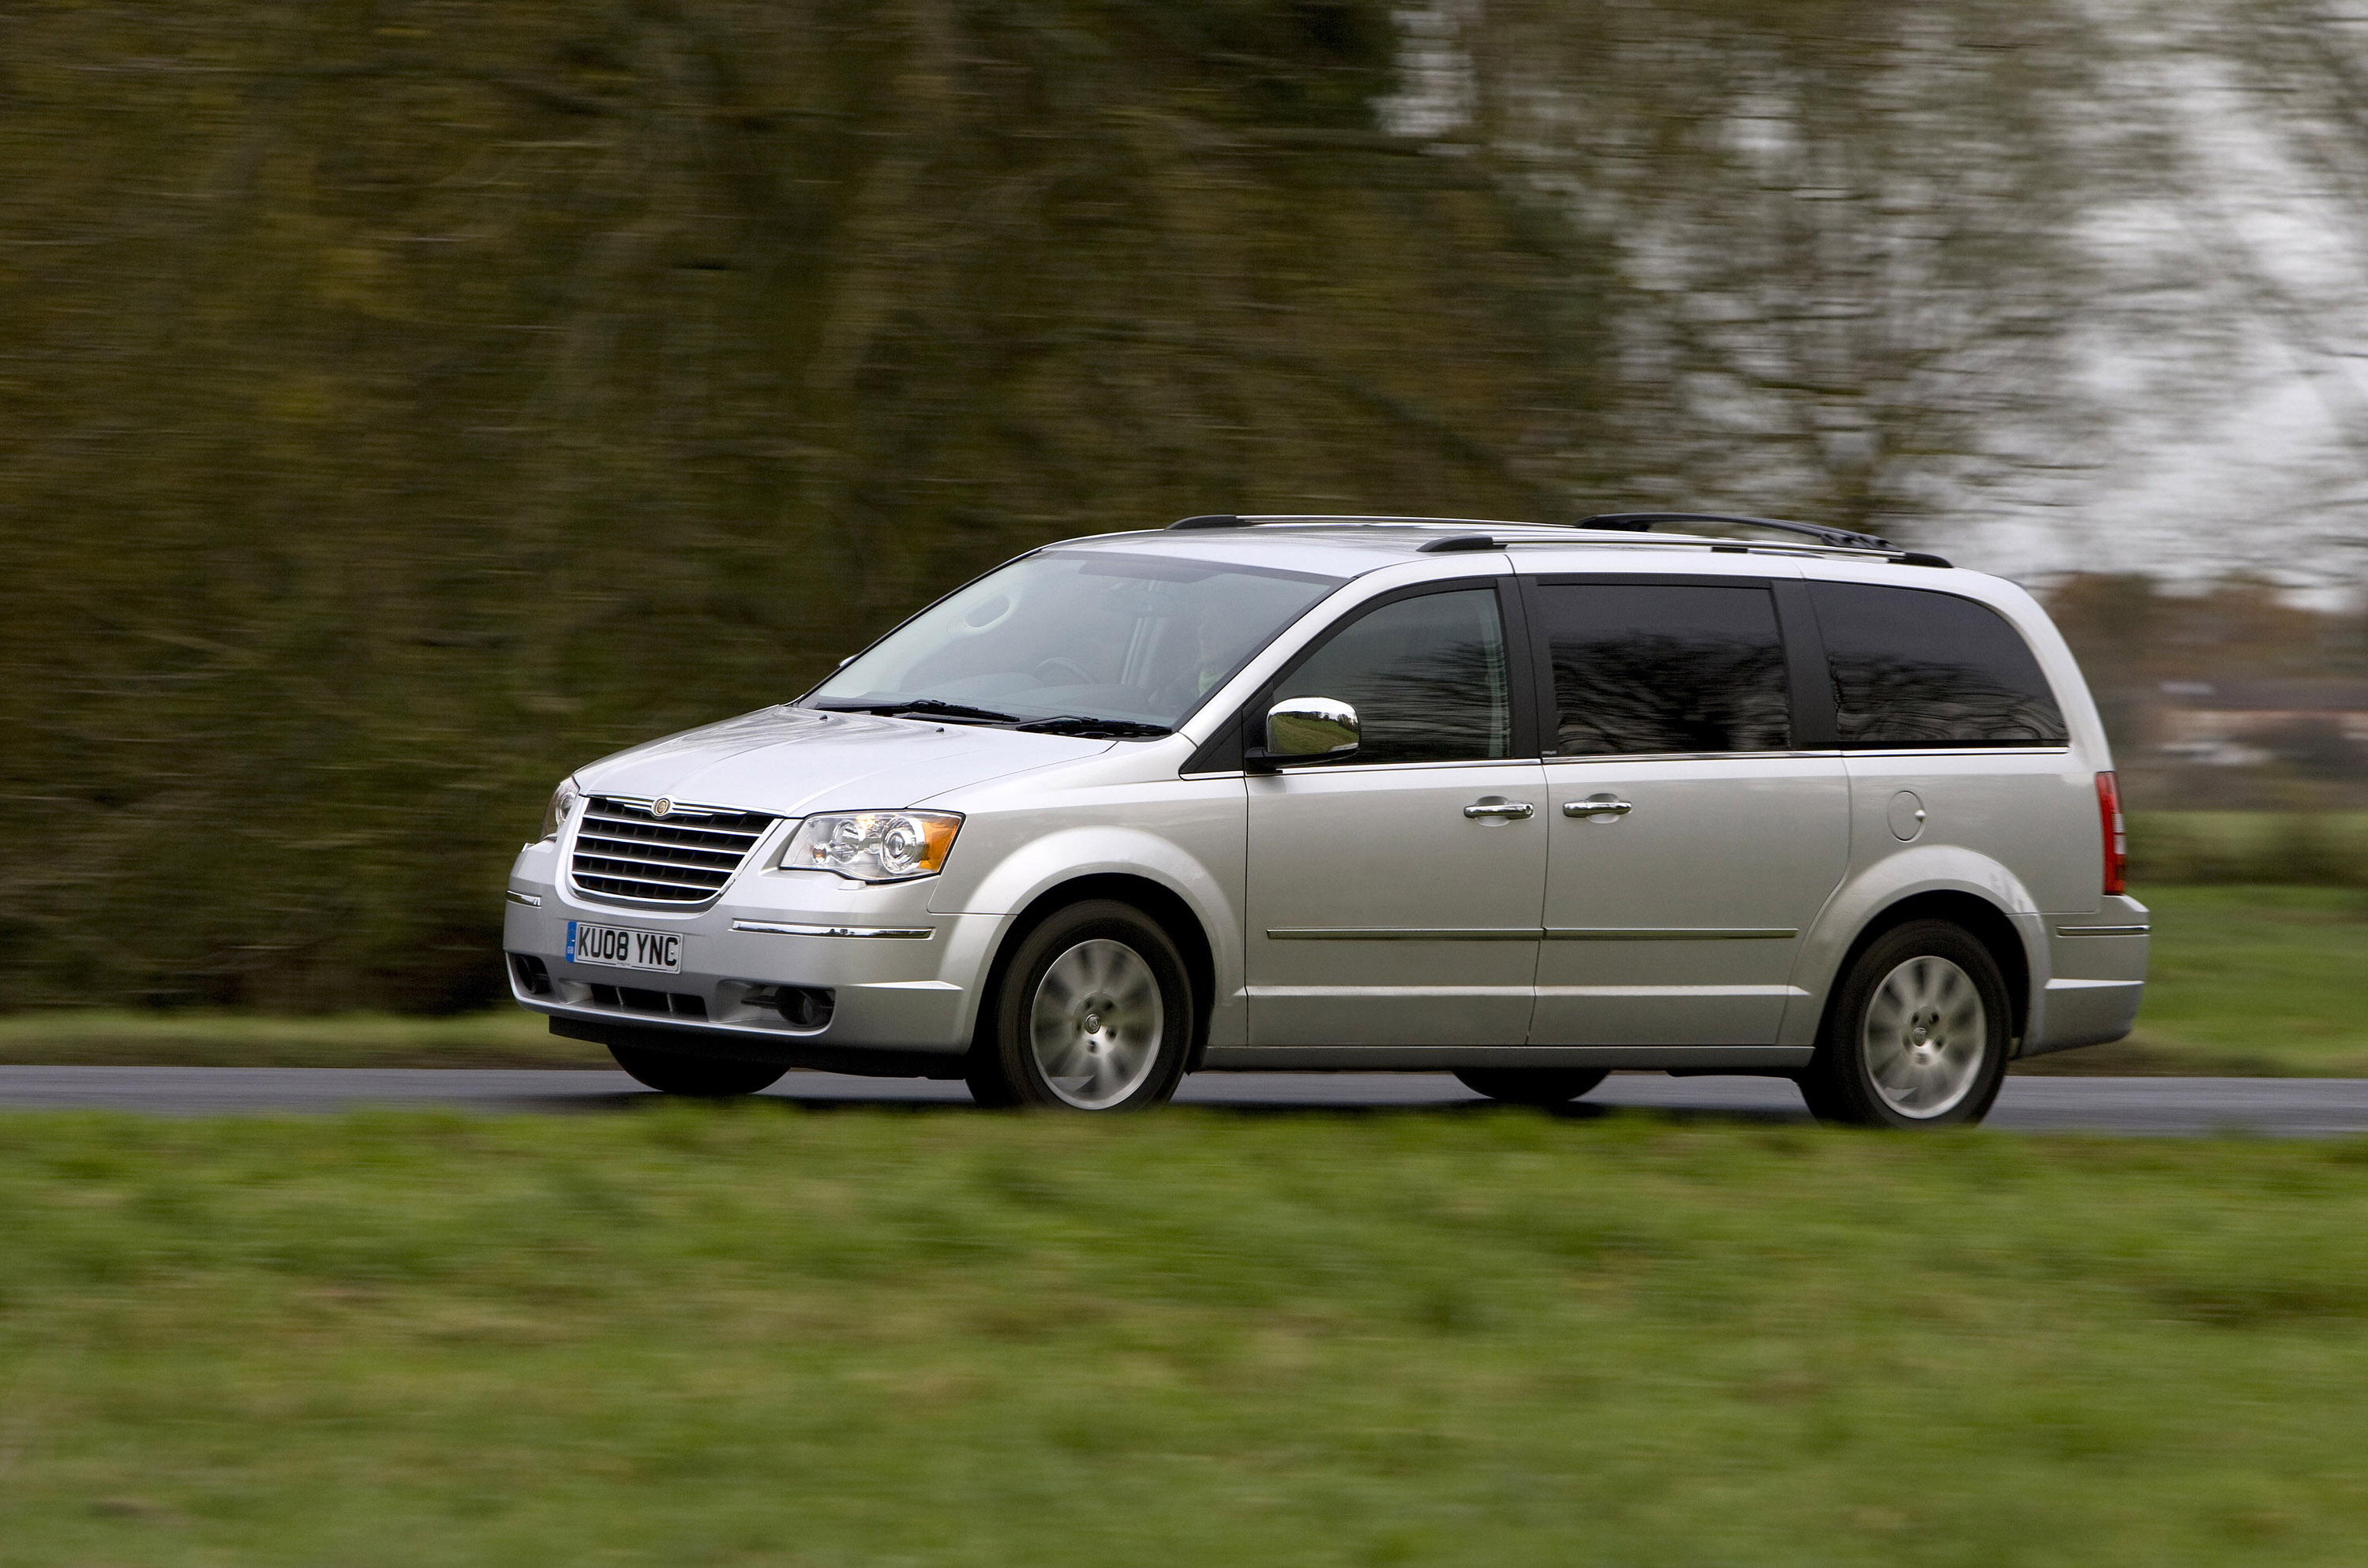 Chrysler grand voyager video review #4